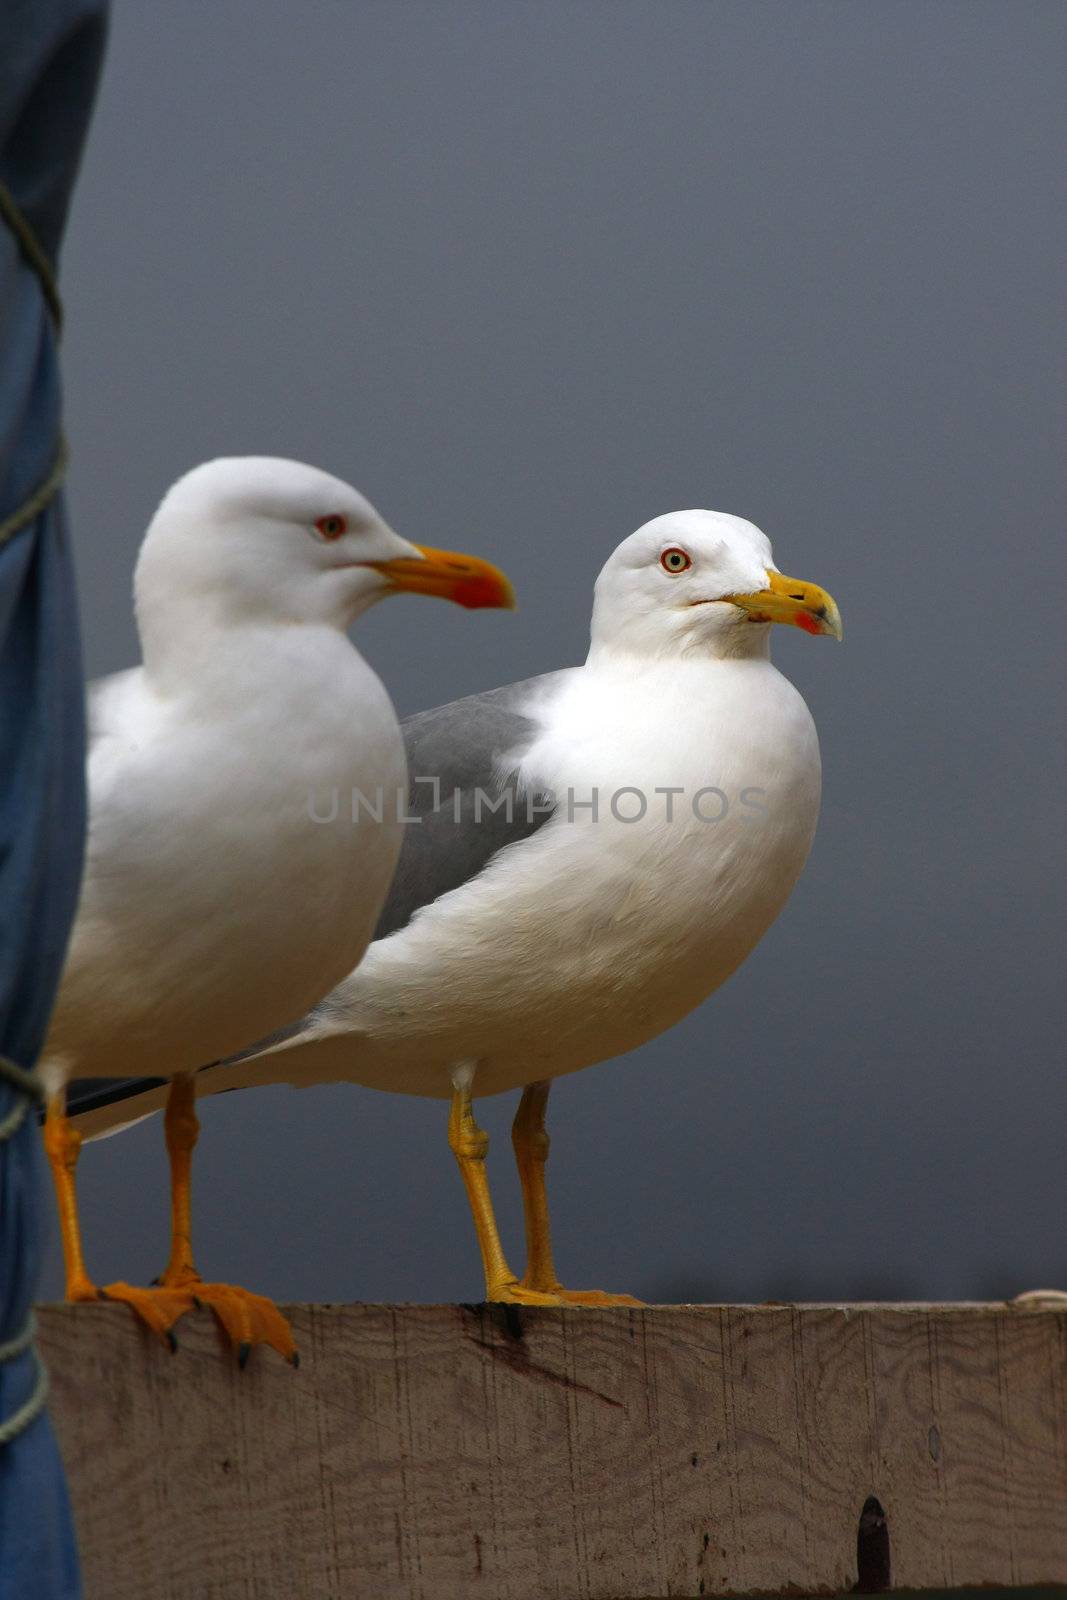 View of two adult yellow-legged seagulls on top of a wooden box.